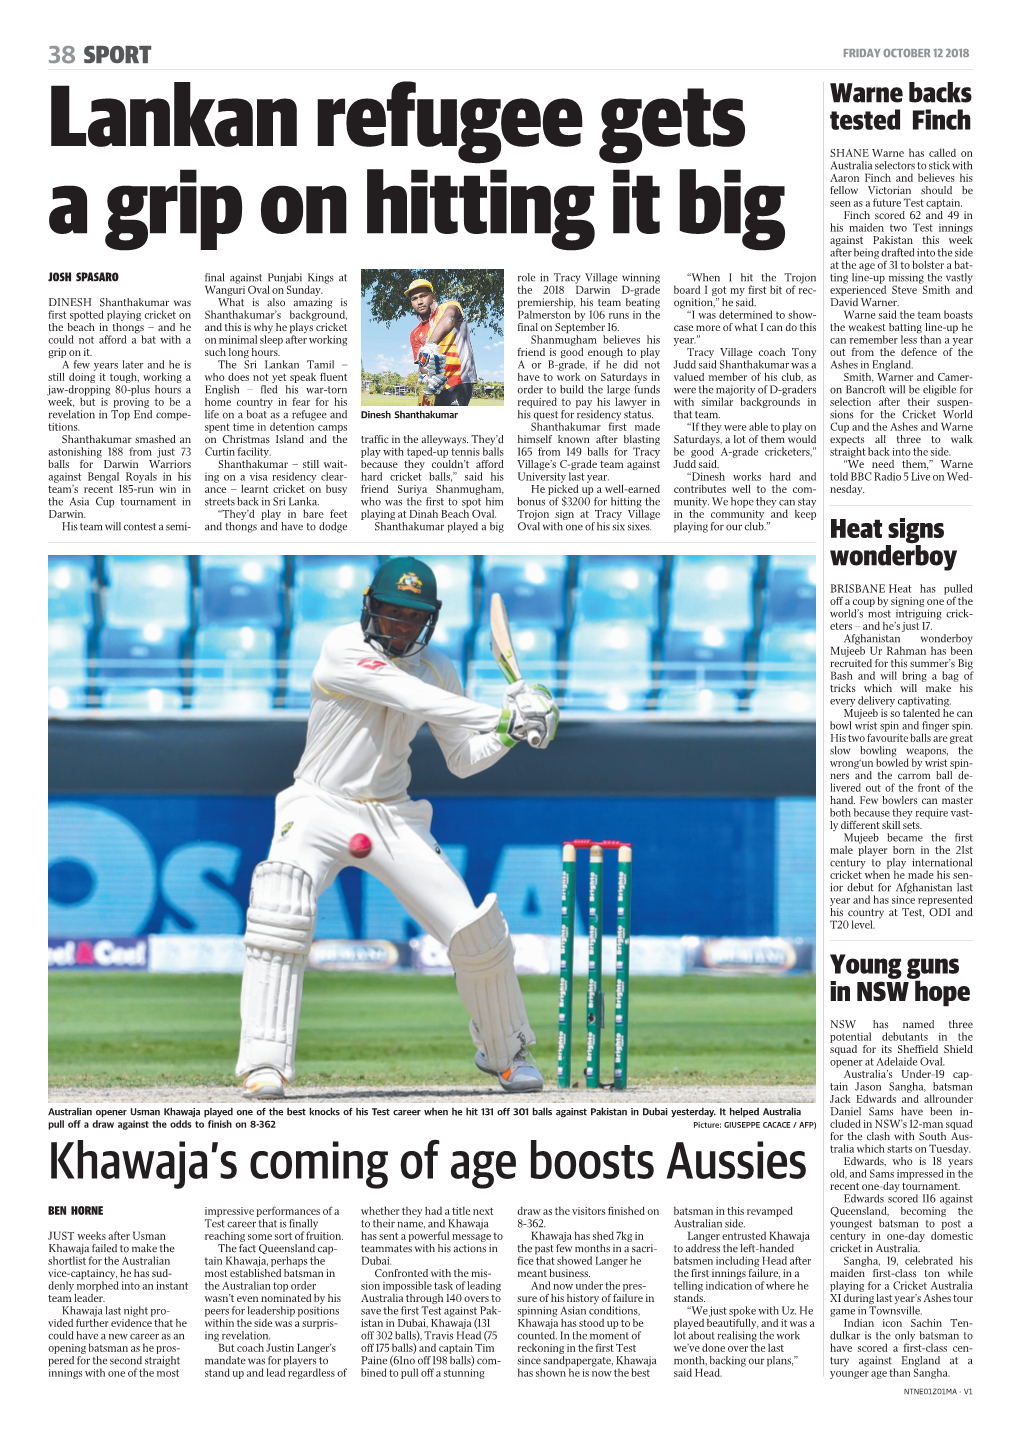 Khawaja's Coming of Age Boosts Aussies